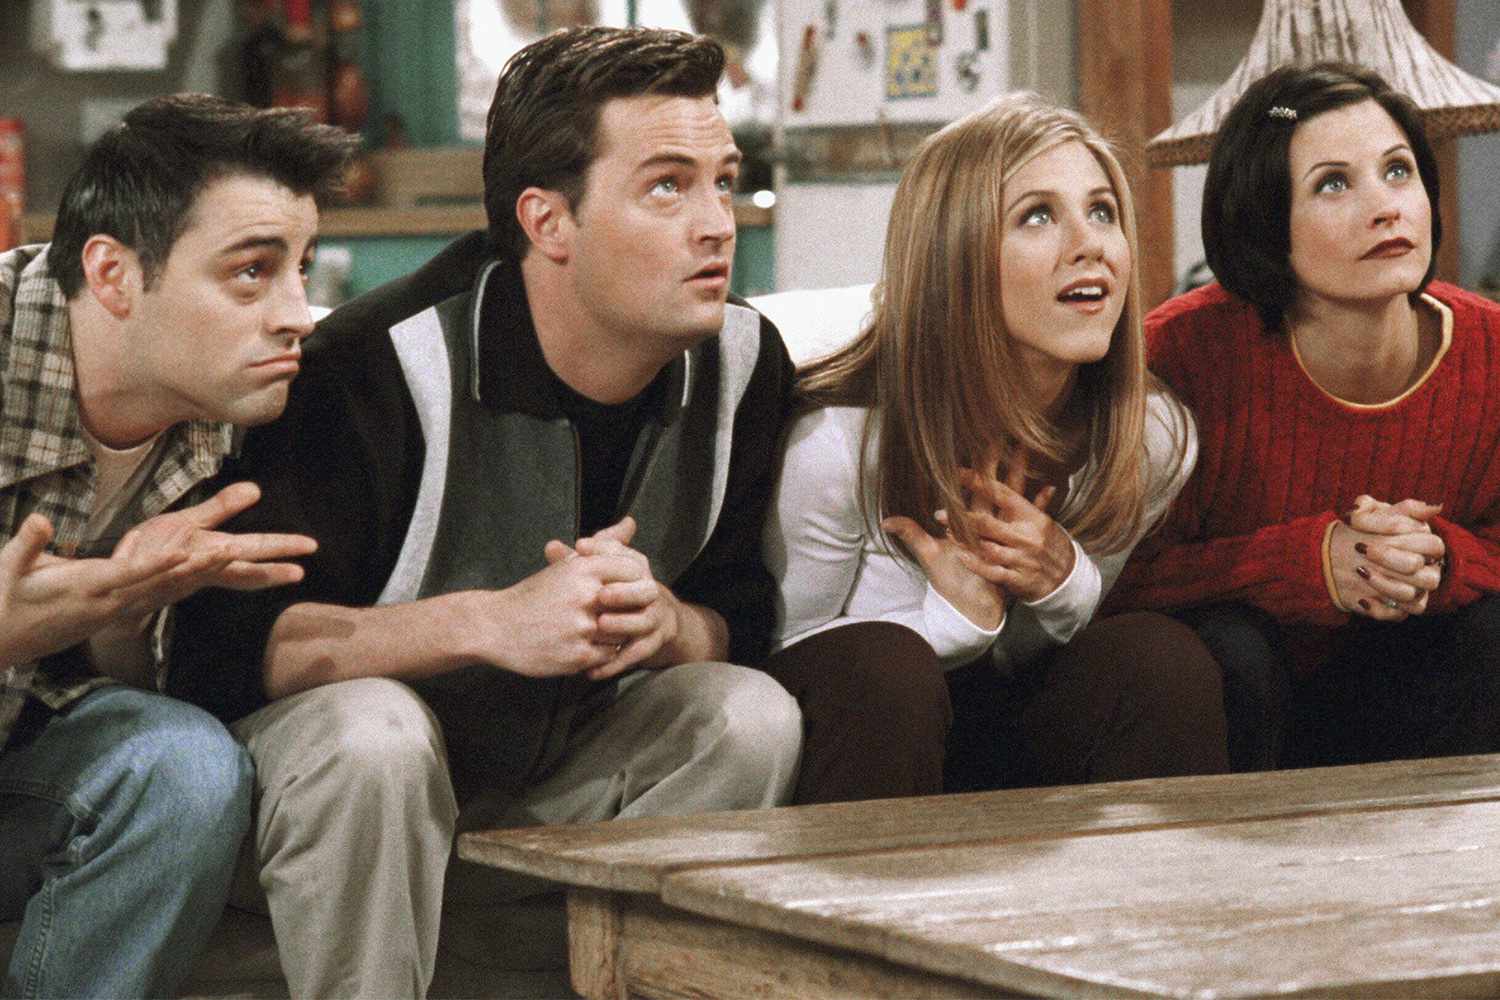 Cable and streamer set Perry “Friends” marathon